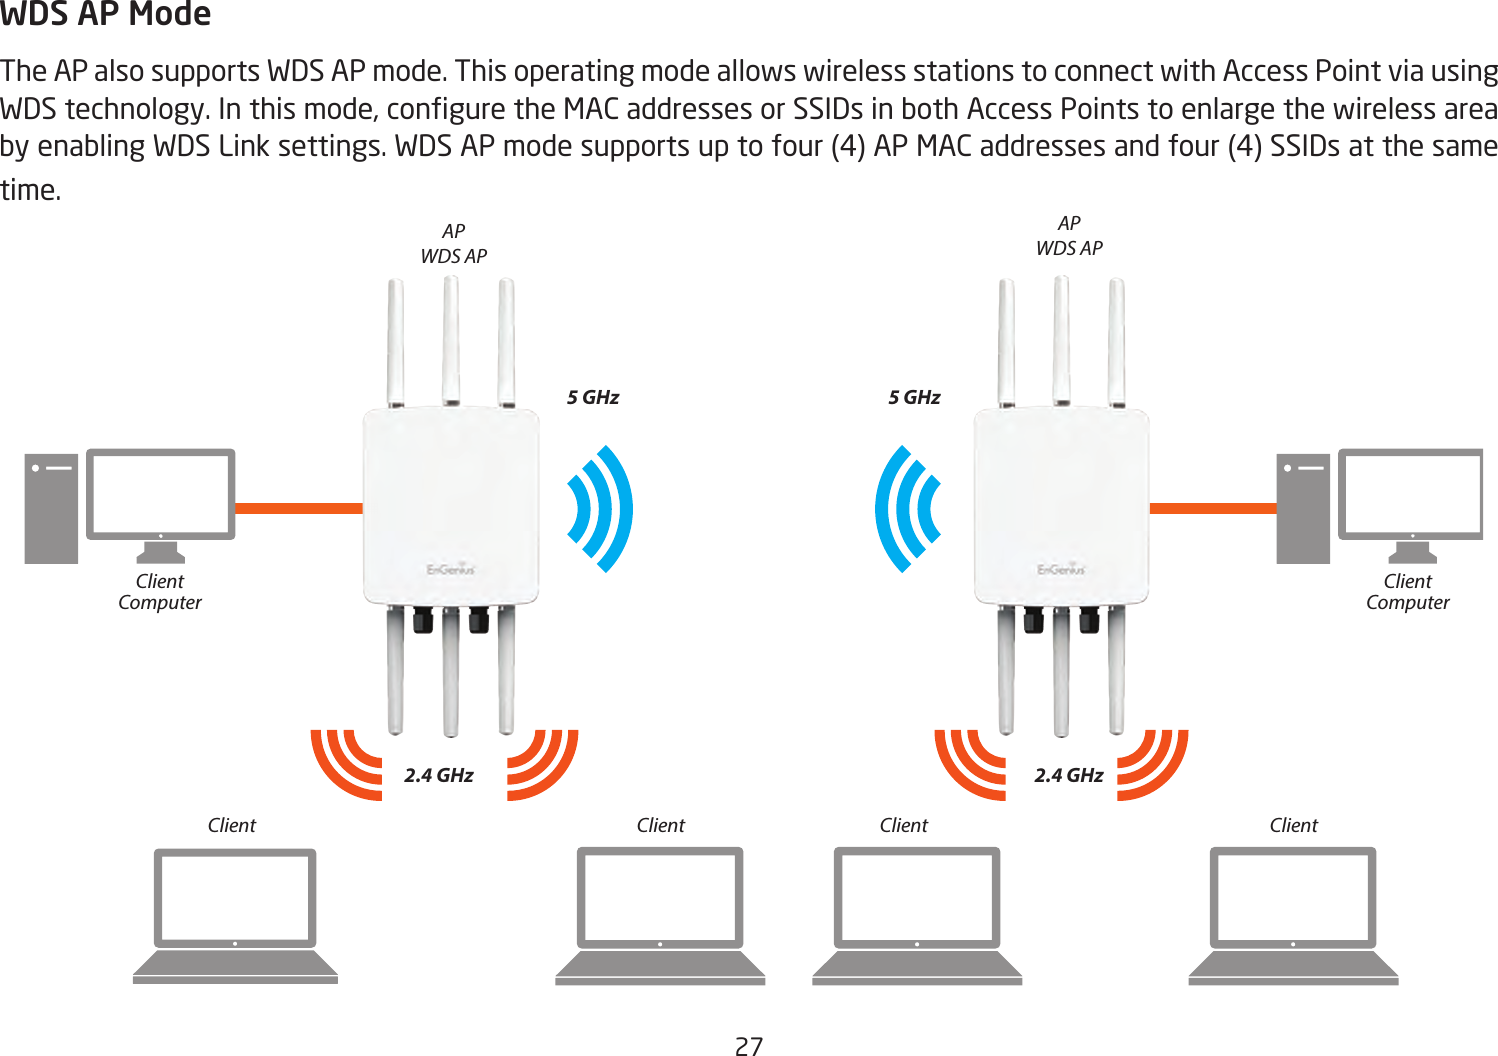 27  WDS AP ModeThe AP also supports WDS AP mode. This operating mode allows wireless stations to connect with Access Point via using WDStechnology.Inthismode,conguretheMACaddressesorSSIDsinbothAccessPointstoenlargethewirelessareaby enabling WDS Link settings. WDS AP mode supports up to four (4) AP MAC addresses and four (4) SSIDs at the same time.APWDS APAPWDS AP2.4 GHz 2.4 GHz5 GHz 5 GHzClient Client Client ClientClientComputerClientComputer